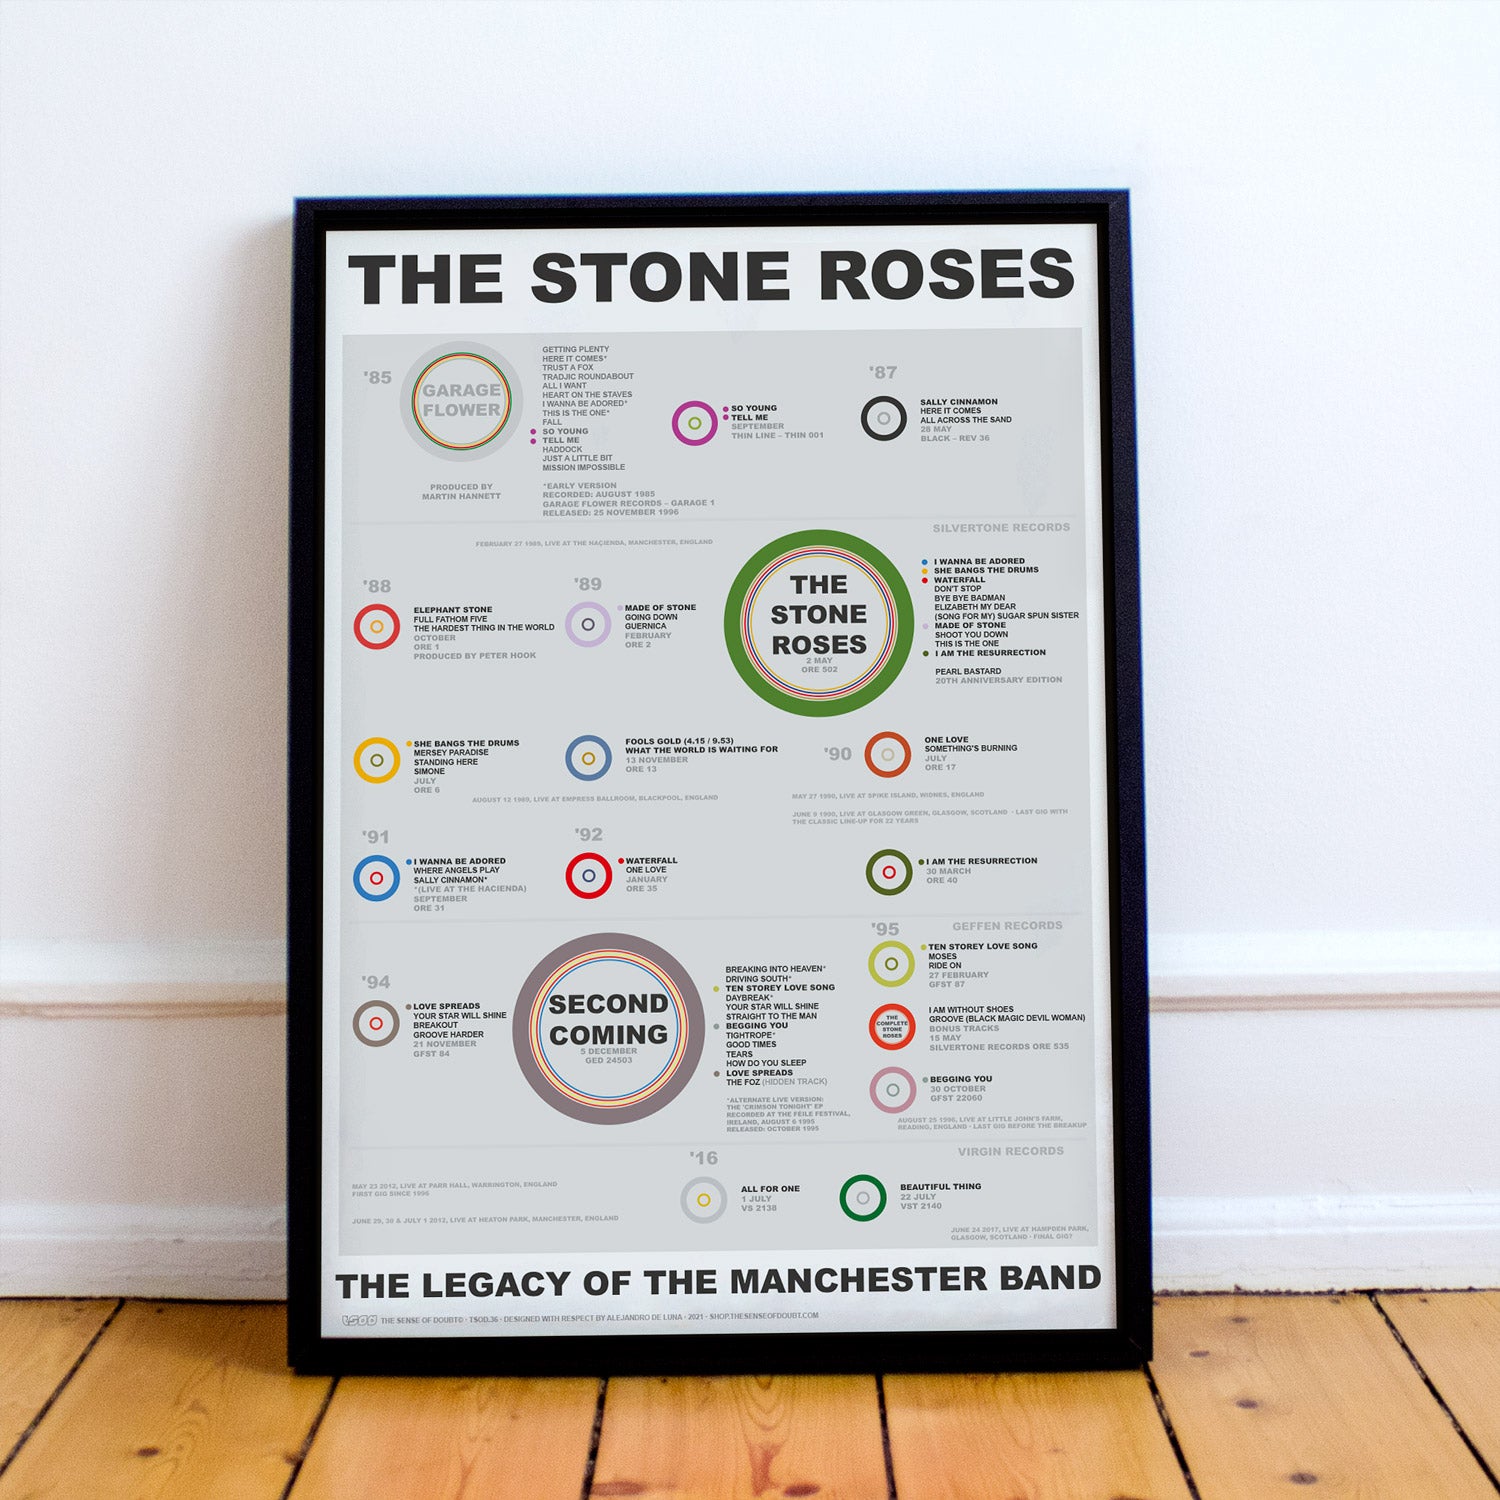 The Stone Roses' Complete Legacy - The Sense of Doubt - The Stone Roses' Complete Legacy - The Sense Of Doubt